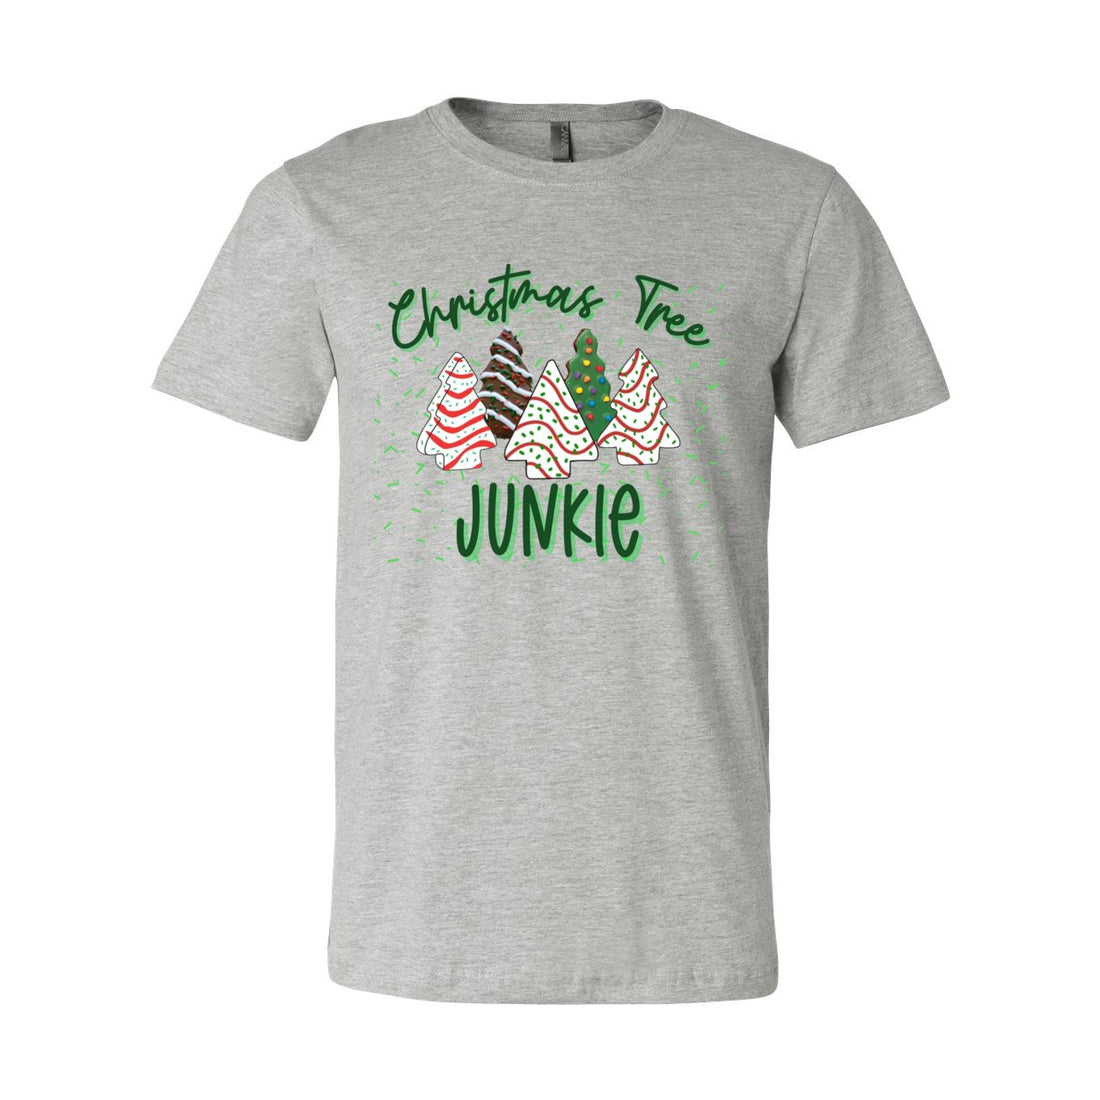 Christmas Tree Junkie - T-Shirts - Positively Sassy - Christmas Tree Junkie